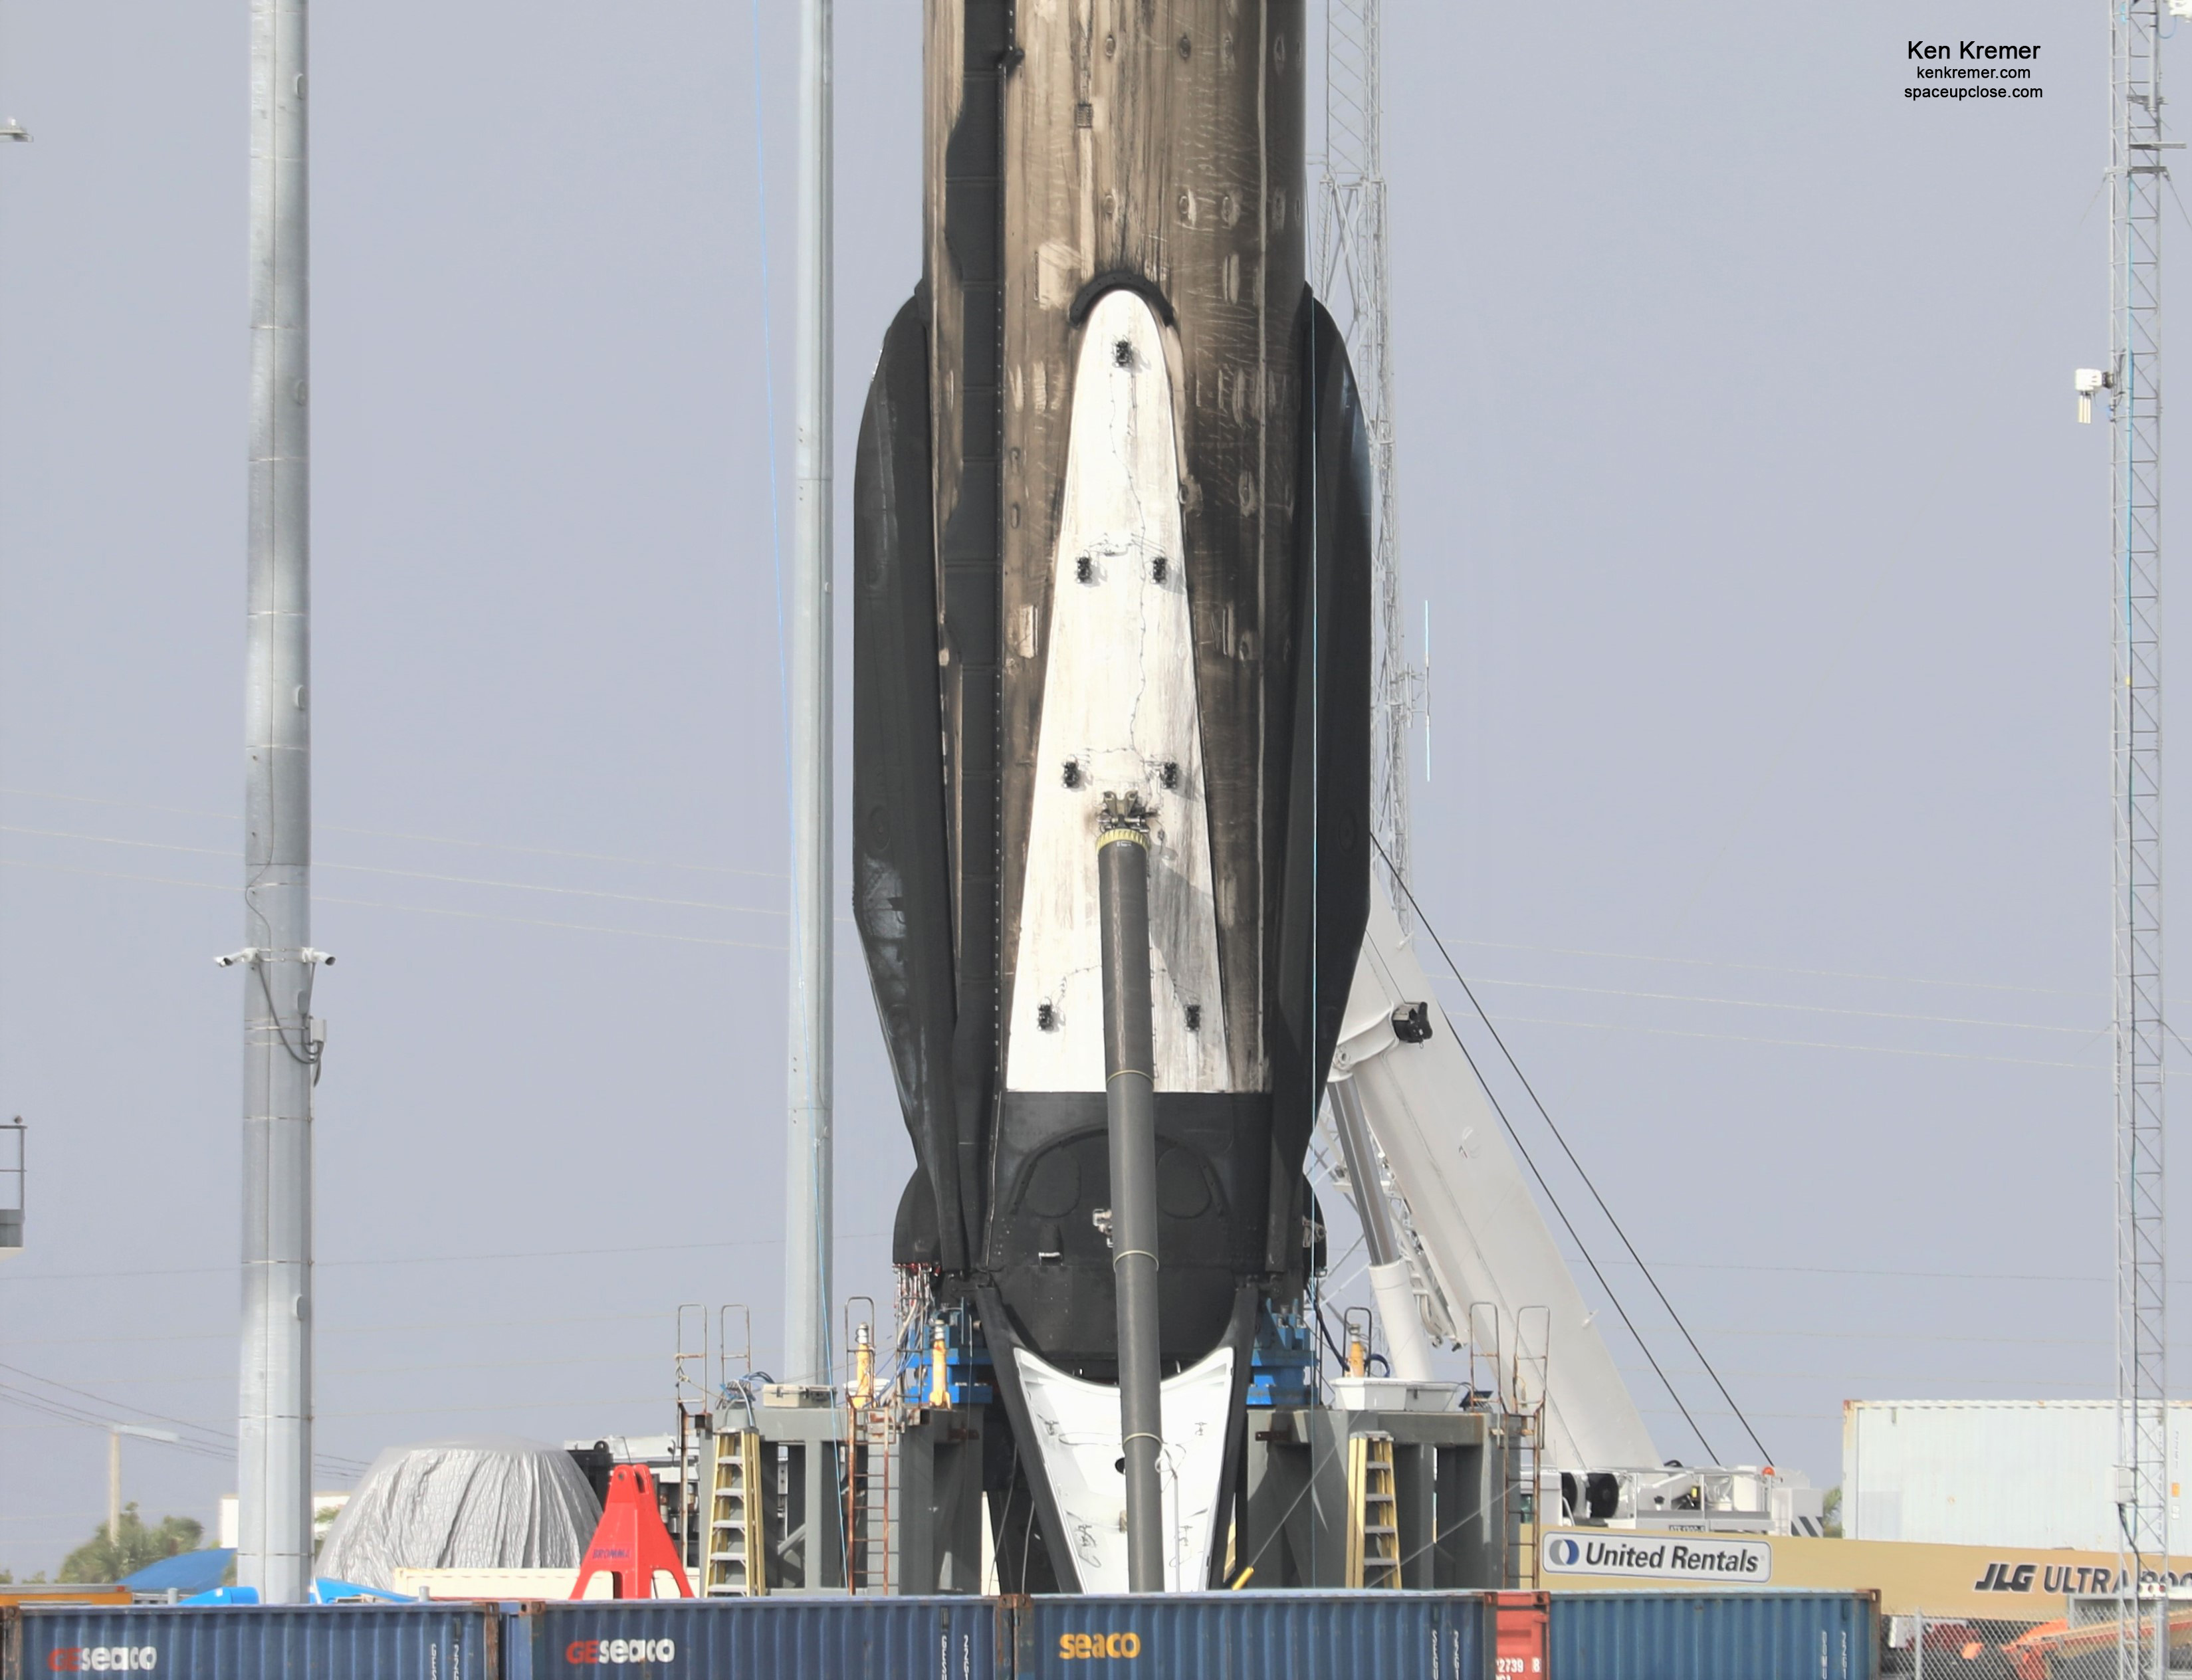 2 Up/2 Off – 4 Time Recycled SpaceX Falcon 9 Landing Legs Retracted and Detached for Roll Back to Cape: Photos